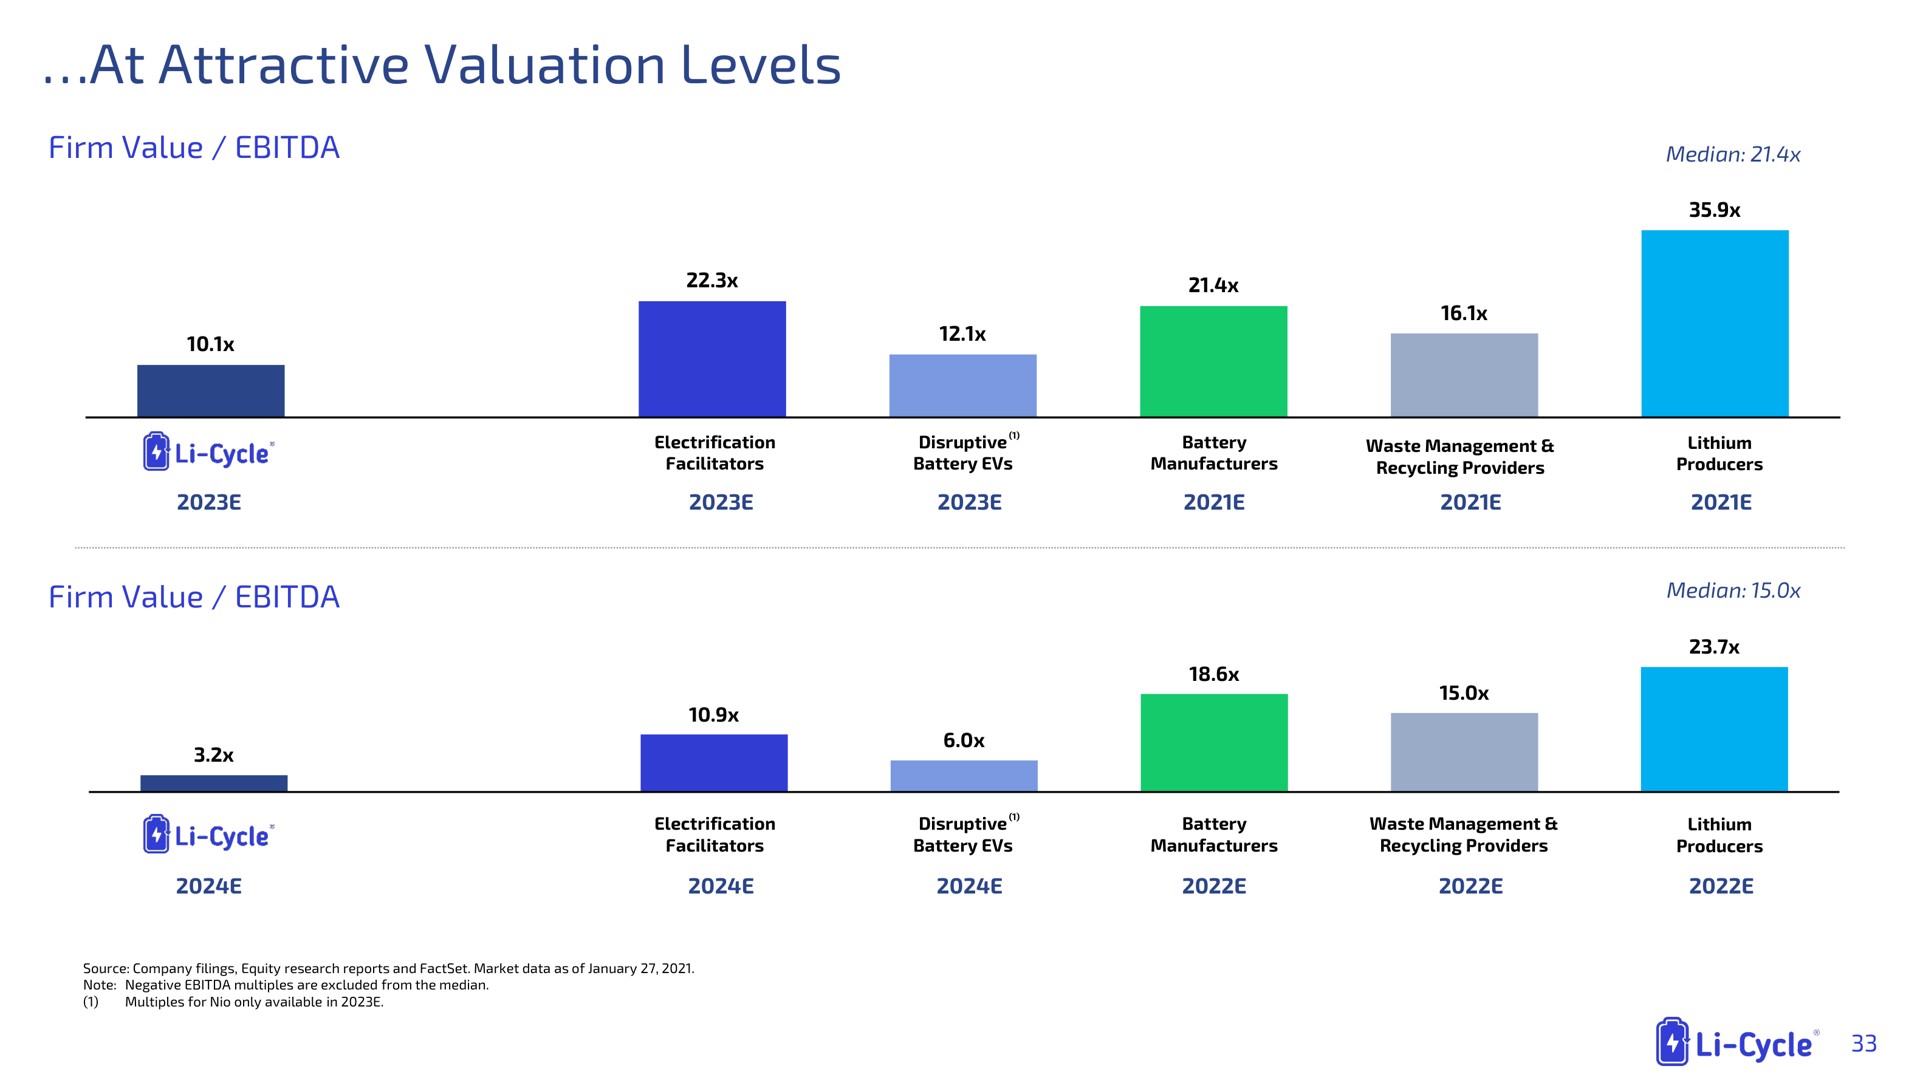 at attractive valuation levels | Li-Cycle